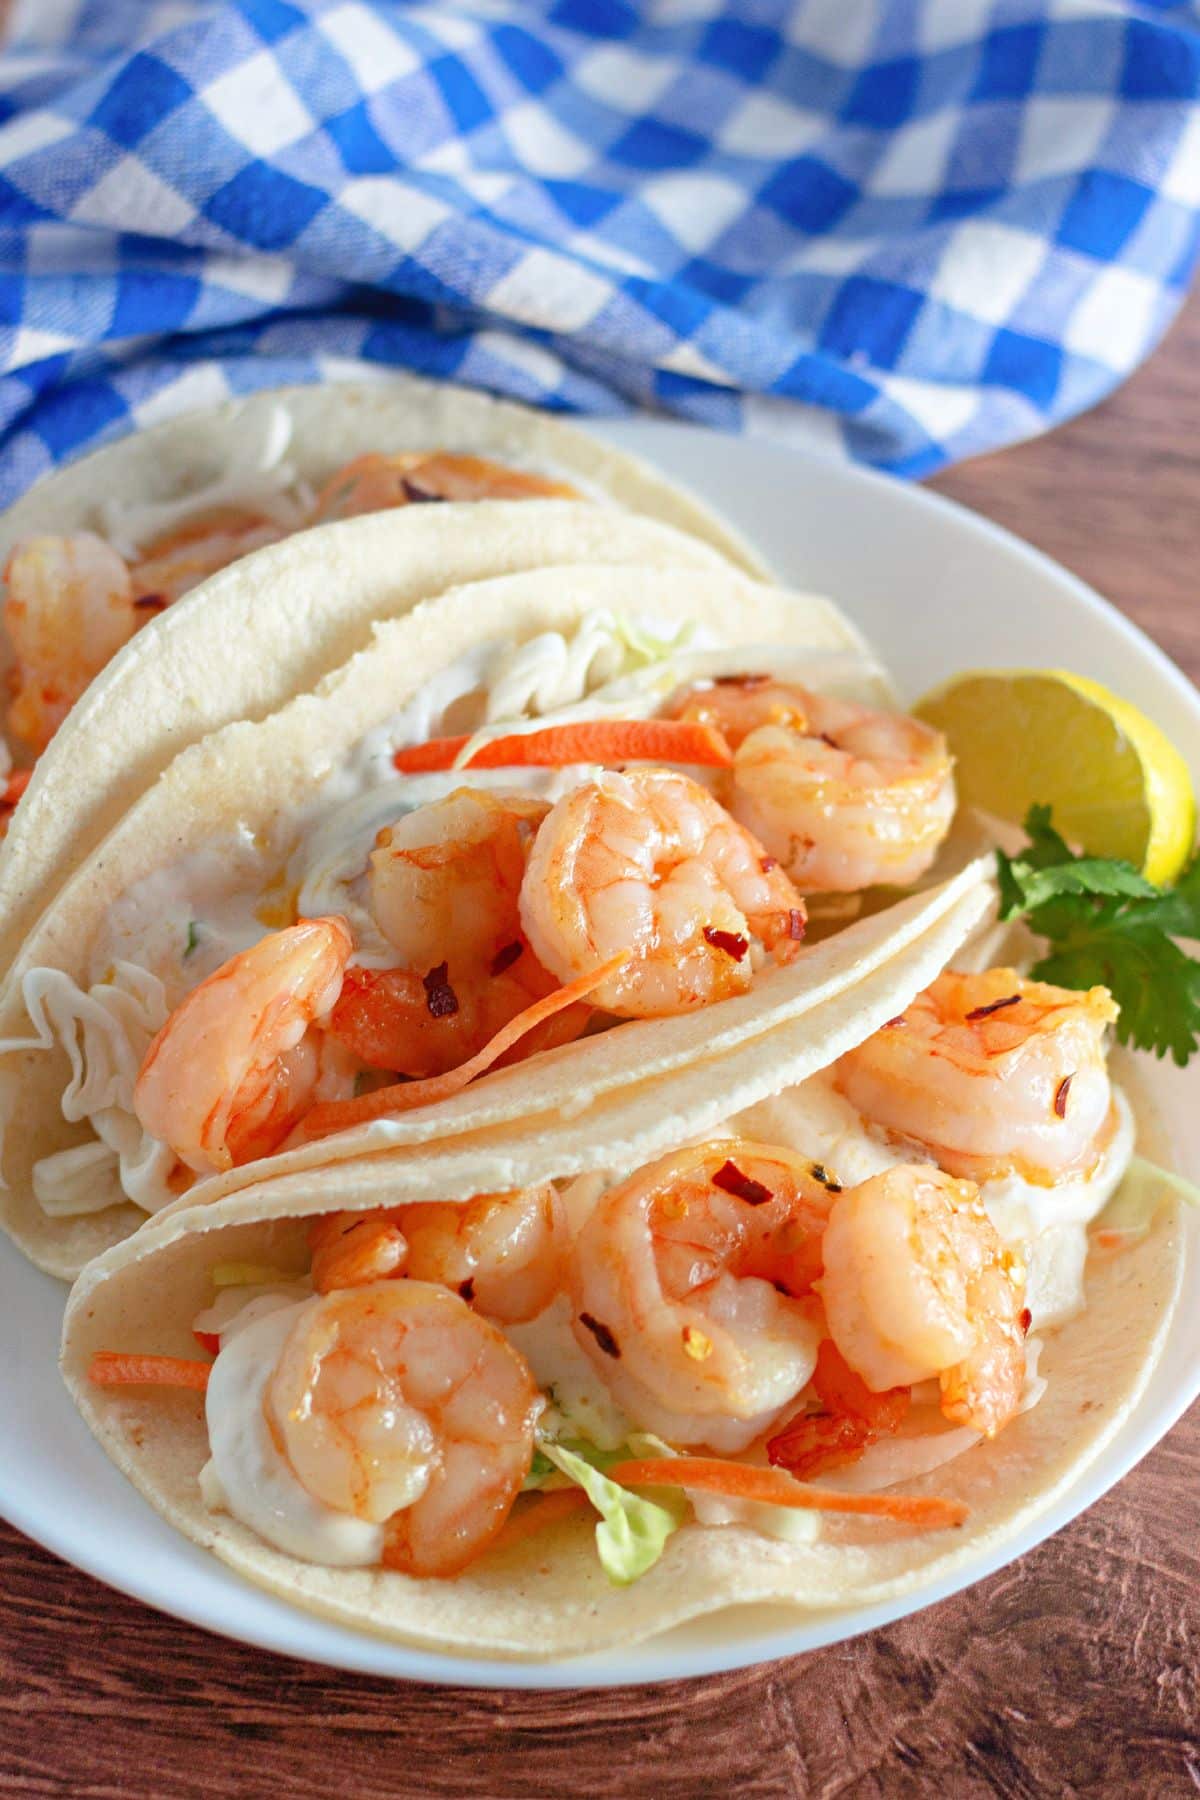 Corn tortillas filled with slaw and shrimp on a plate.